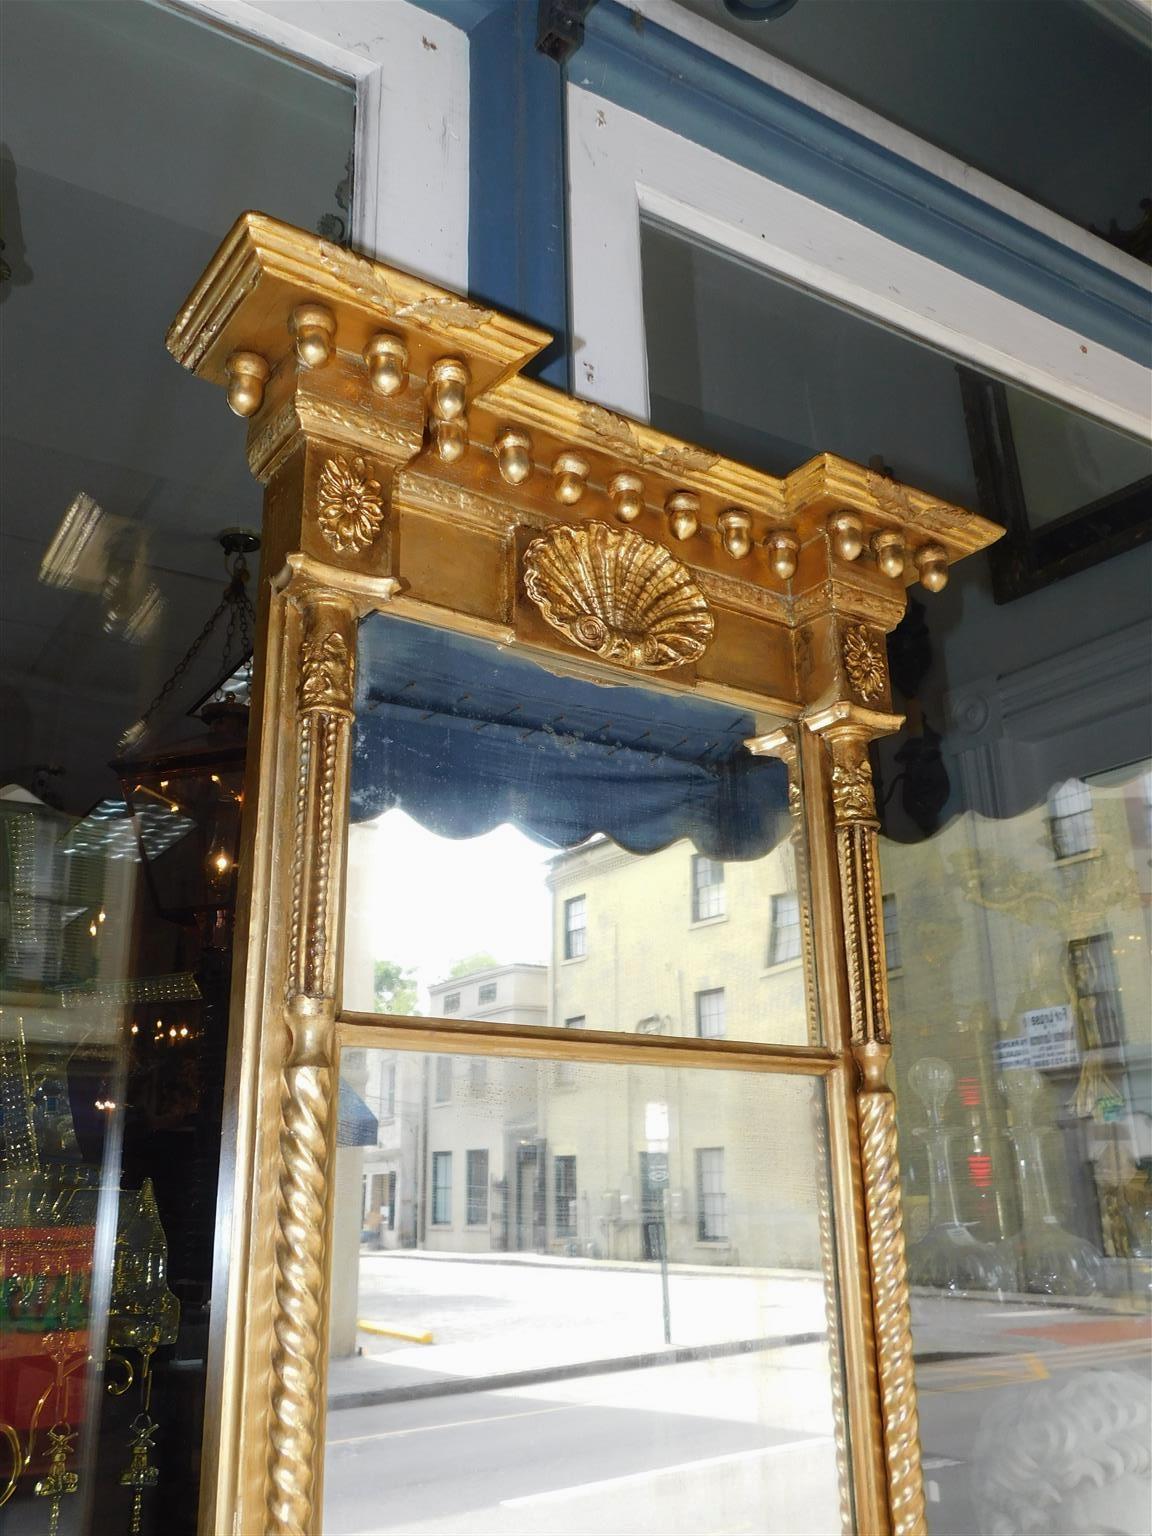 American Classical Gilt Mirror with Acorn, Shell, and Medallion Carvings C. 1815 In Excellent Condition For Sale In Hollywood, SC